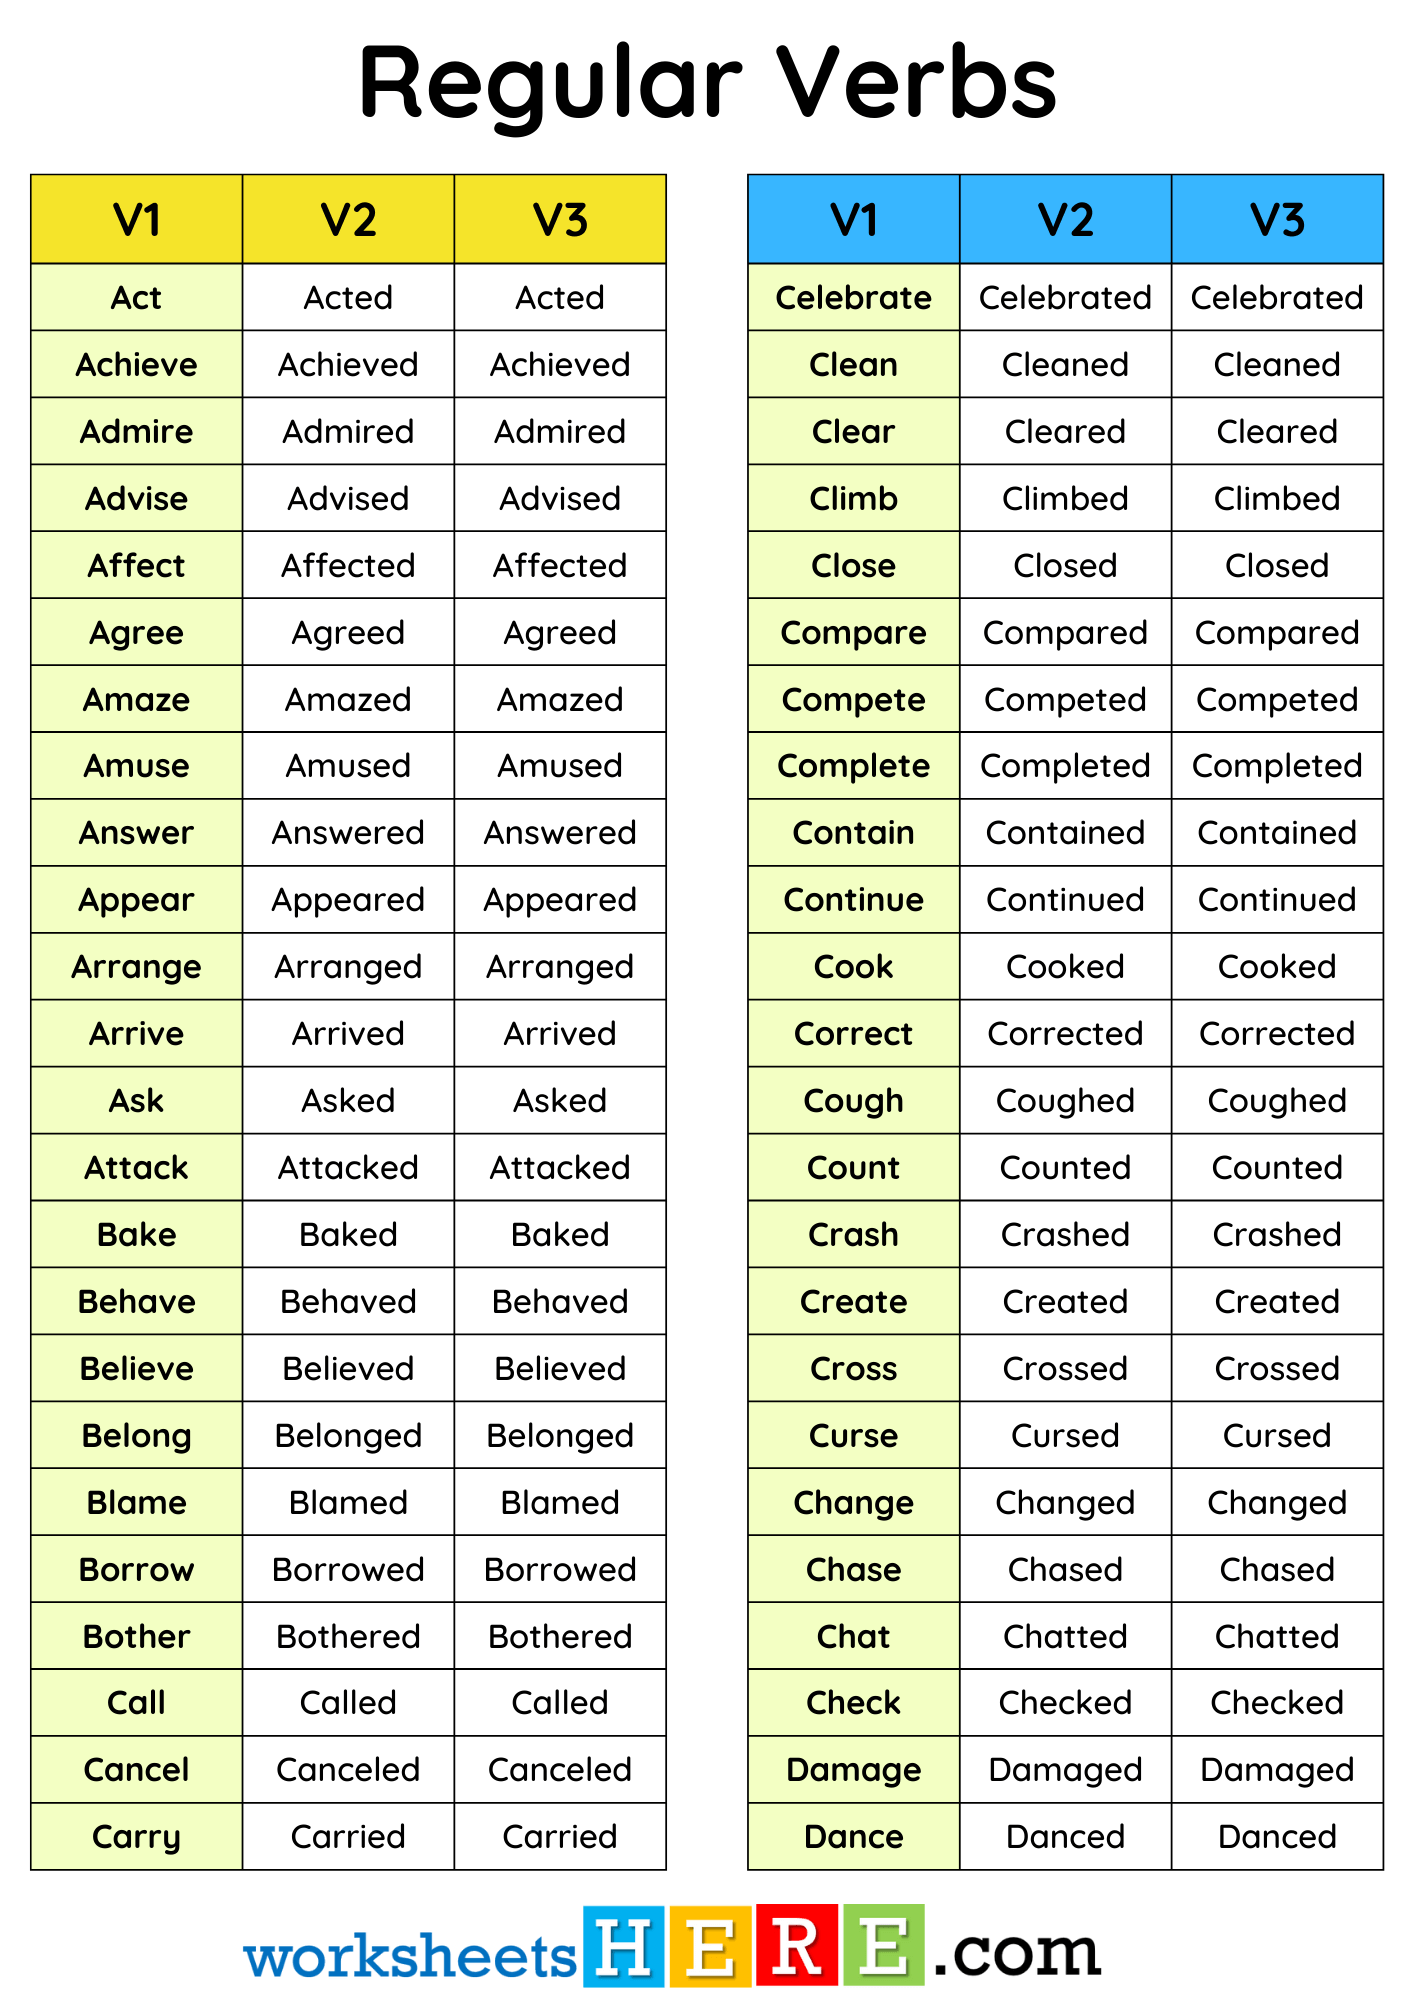 +200 Regular Verbs List in English PDF Worksheet For Students and Kids